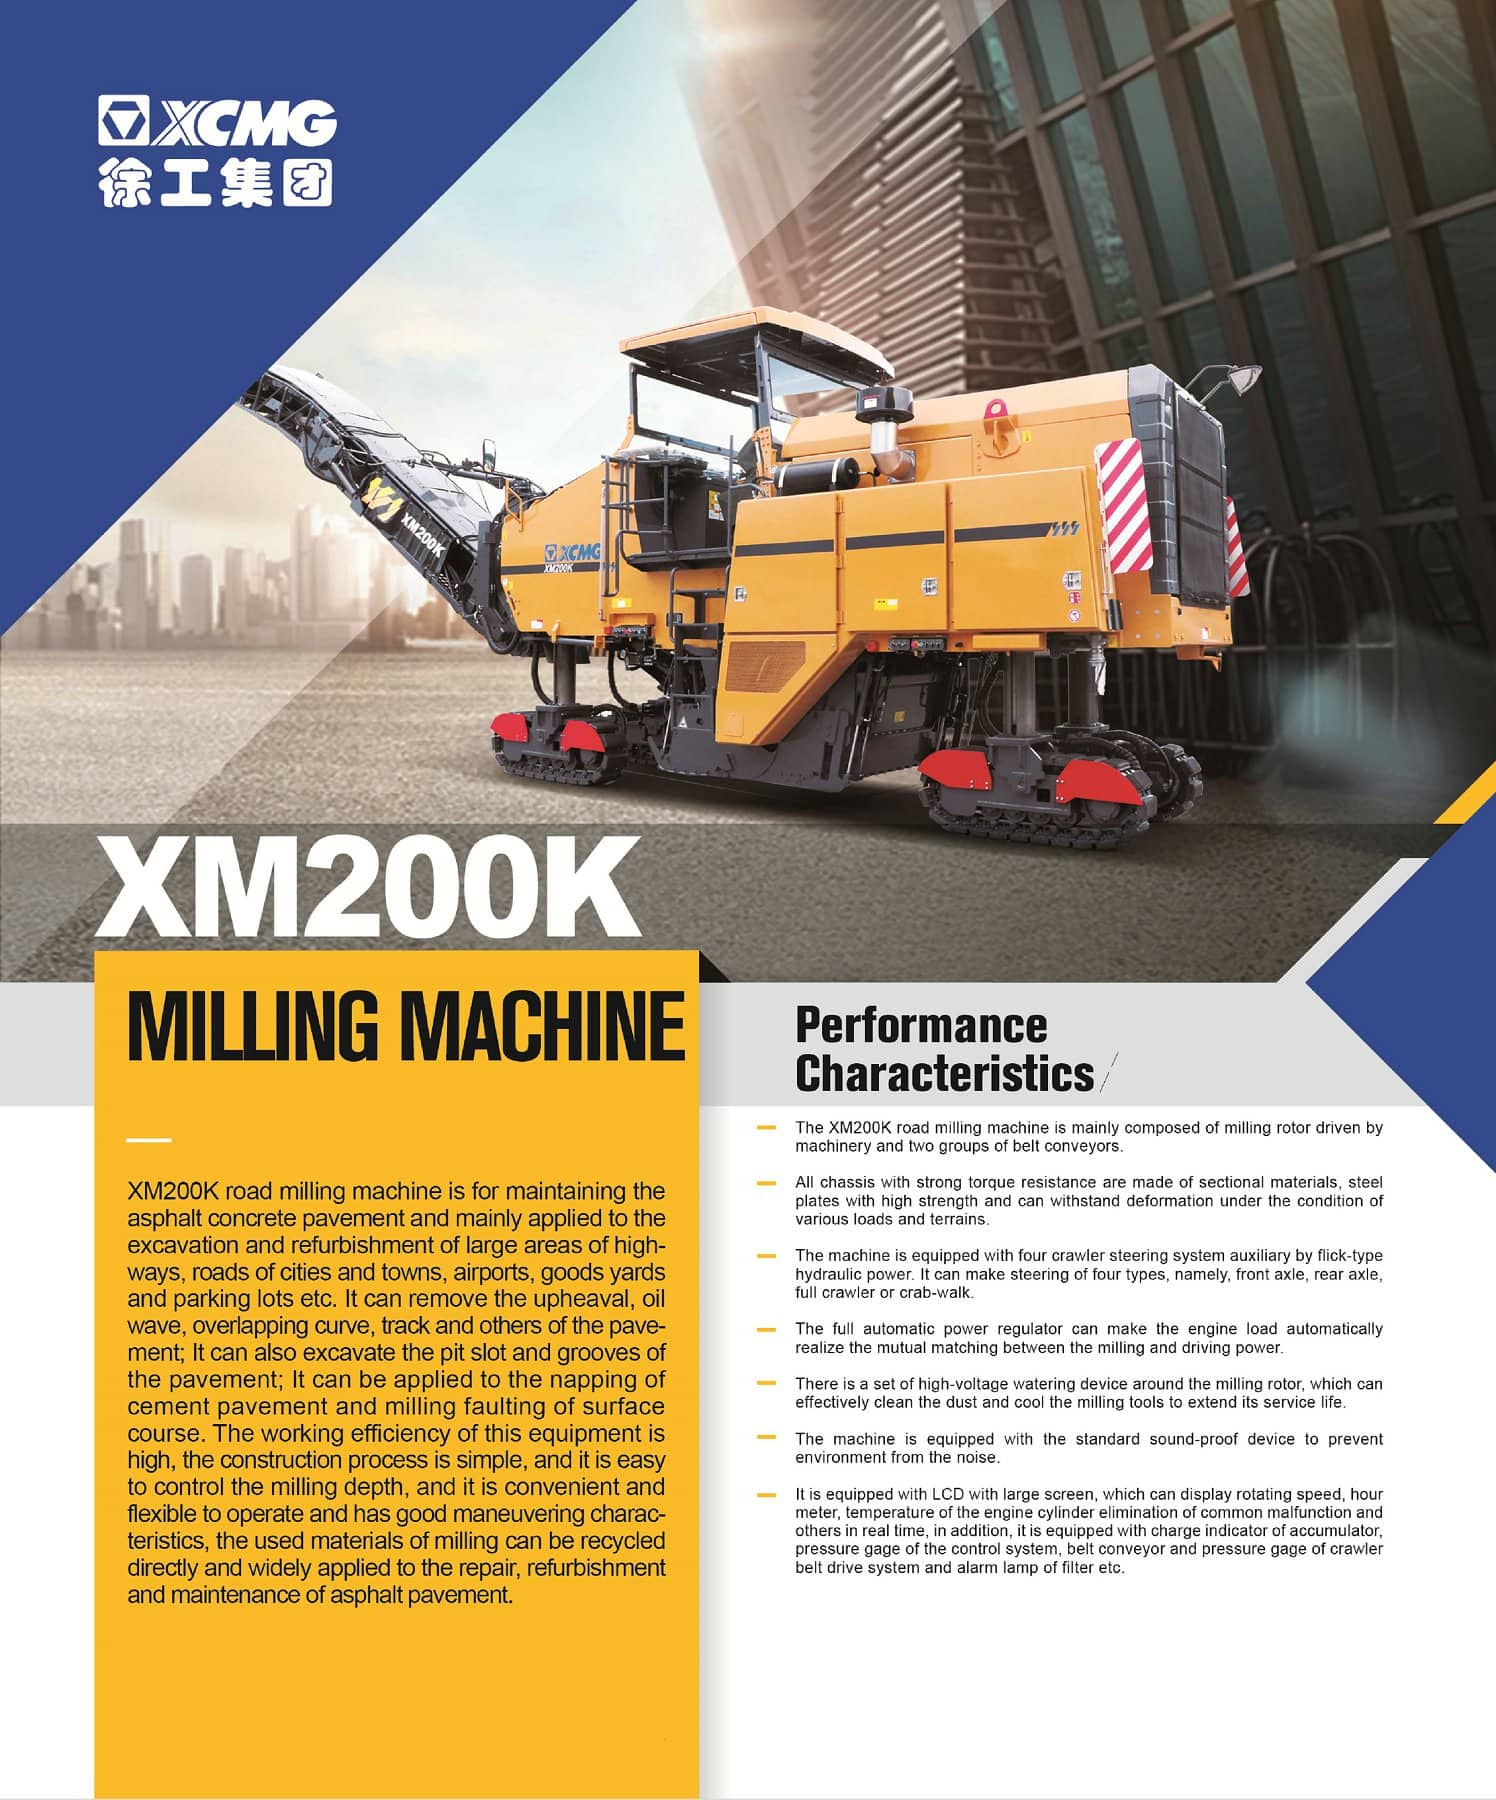 XCMG official XM200K milling Machine for sale